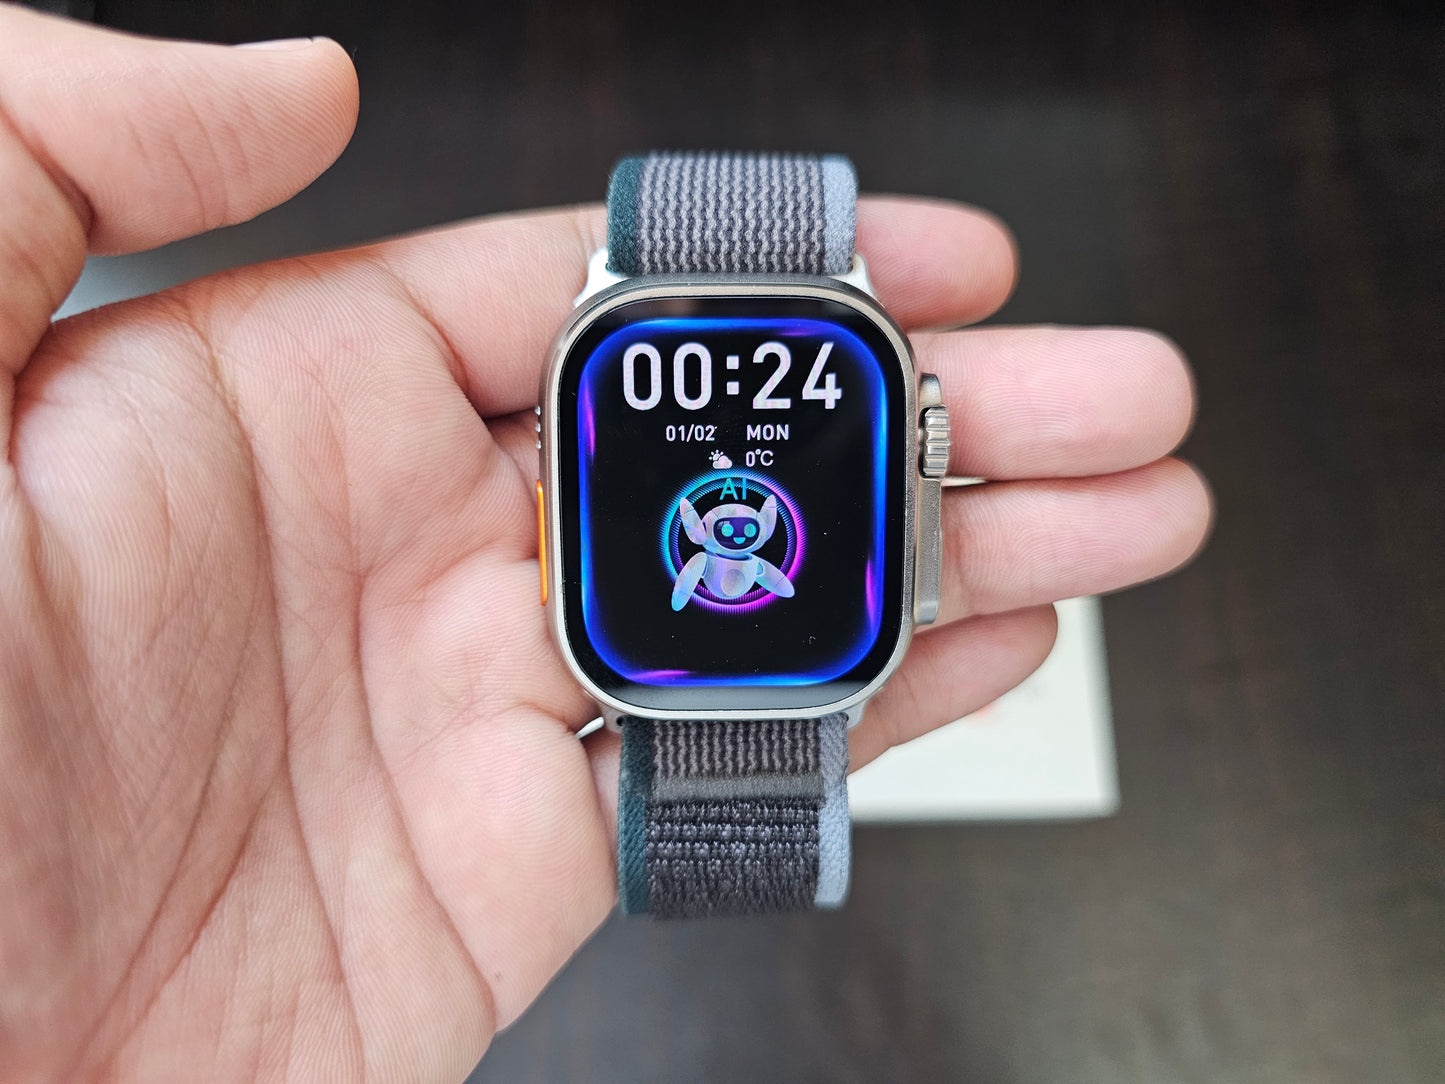 HK 15 Pro Max Ultra 2 with Amoled display, Chat-GPT! Best Apple watch ultra 2 clone